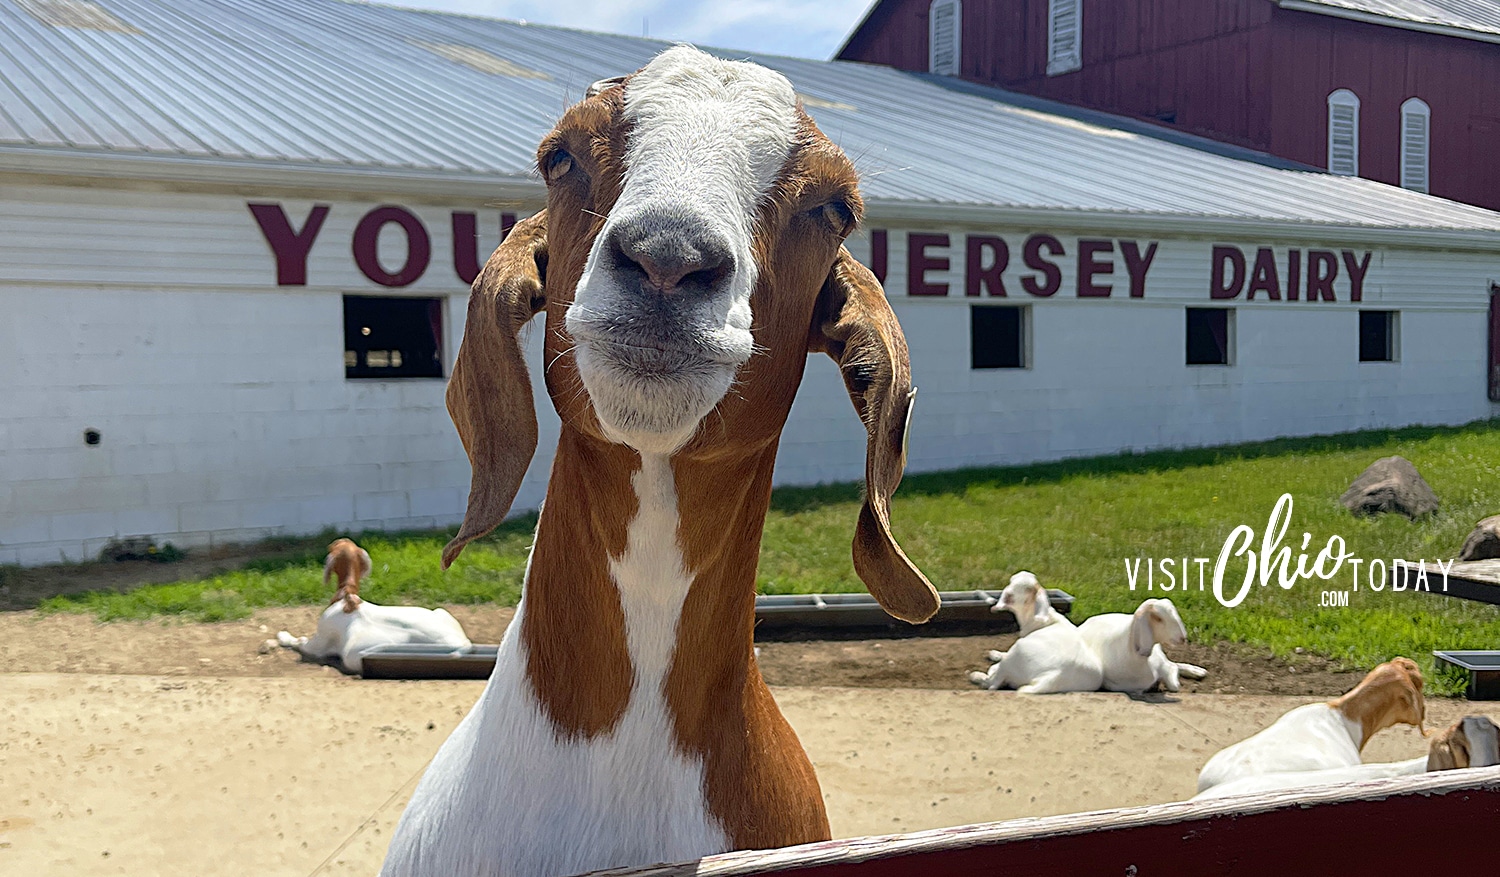 horizontal photo of a goat at a fence in front of the Young's Jersey Dairy building. Photo credit: Cindy Gordon of VisitOhioToday.com